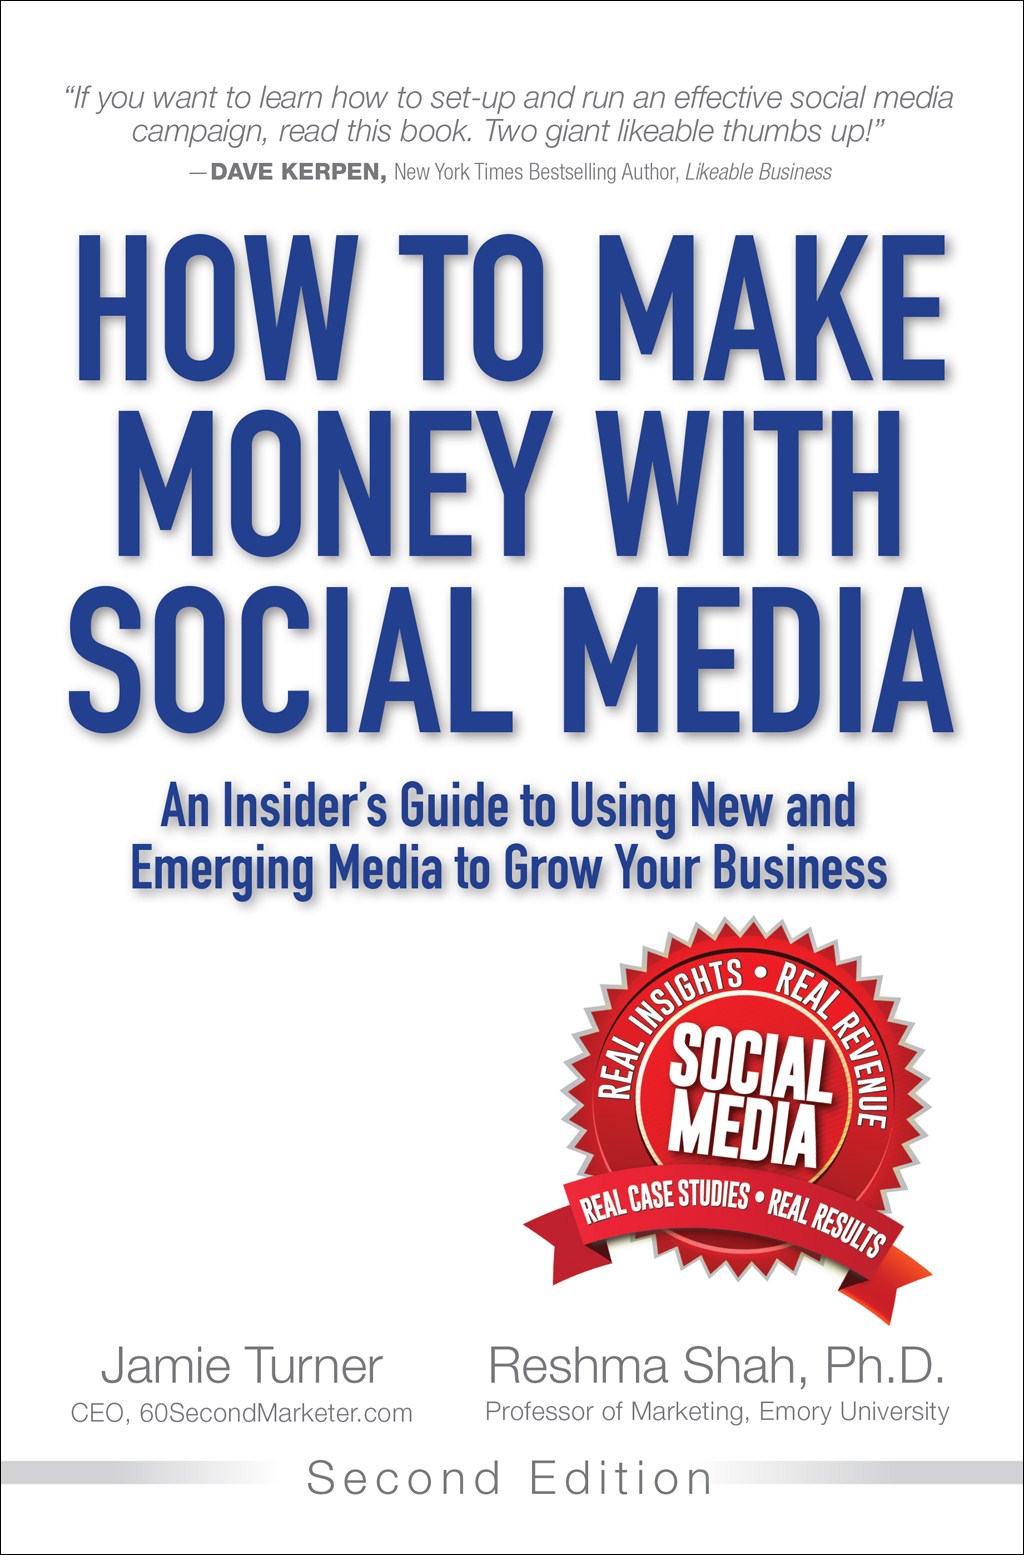 How to Make Money with Social Media: An Insider's Guide to Using New and Emerging Media to Grow Your Business, 2nd Edition